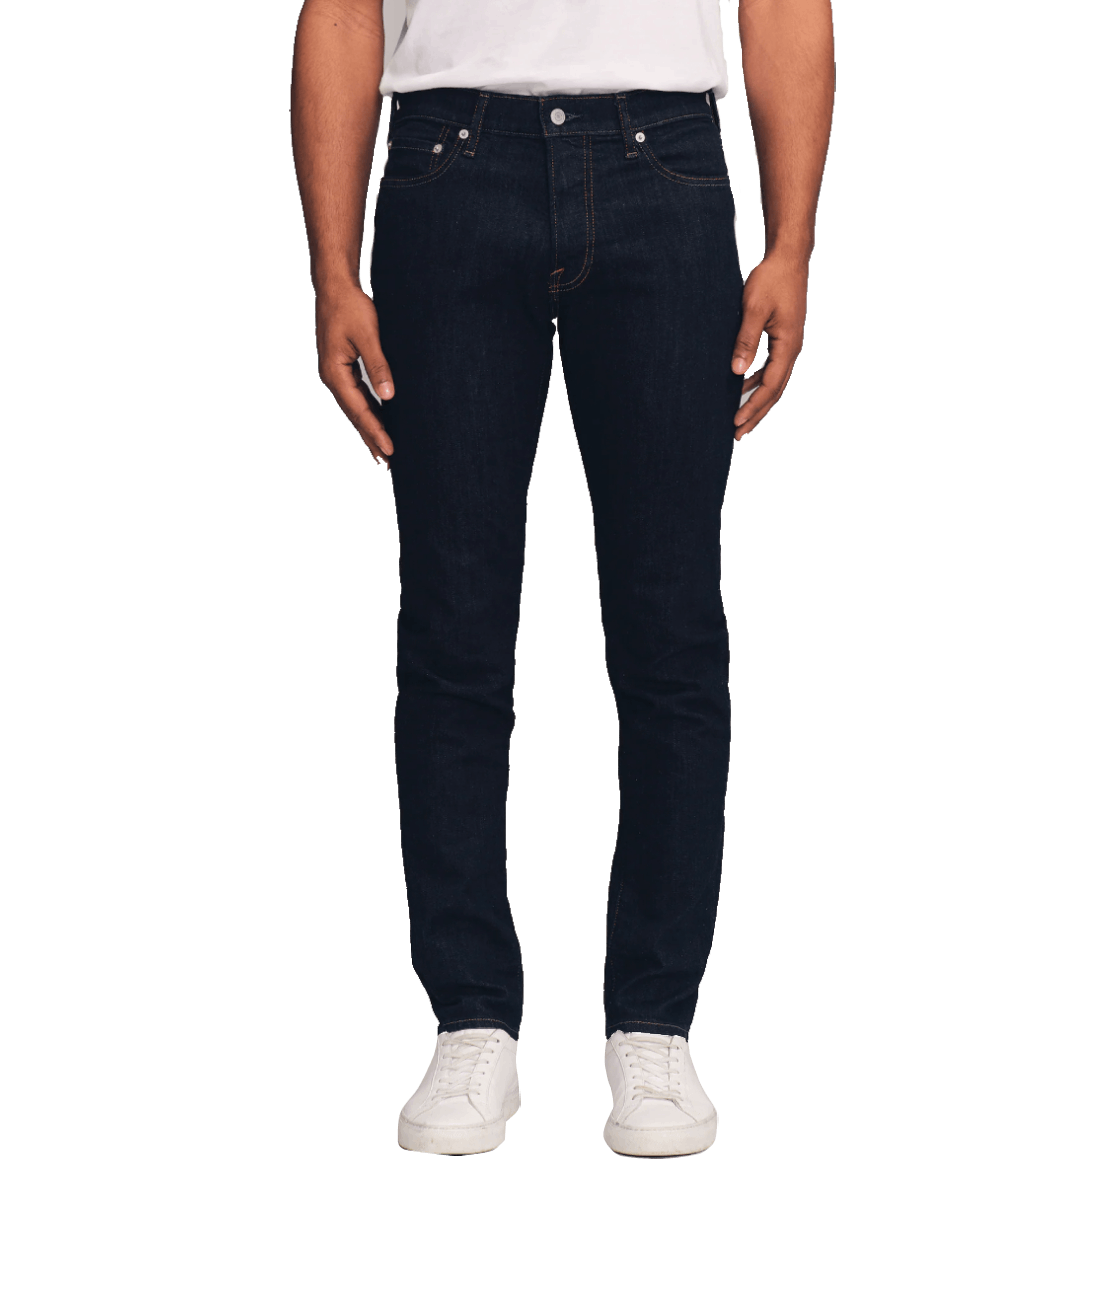 Quần Jeans Abercrombie & Fitch Skinny Fit 14